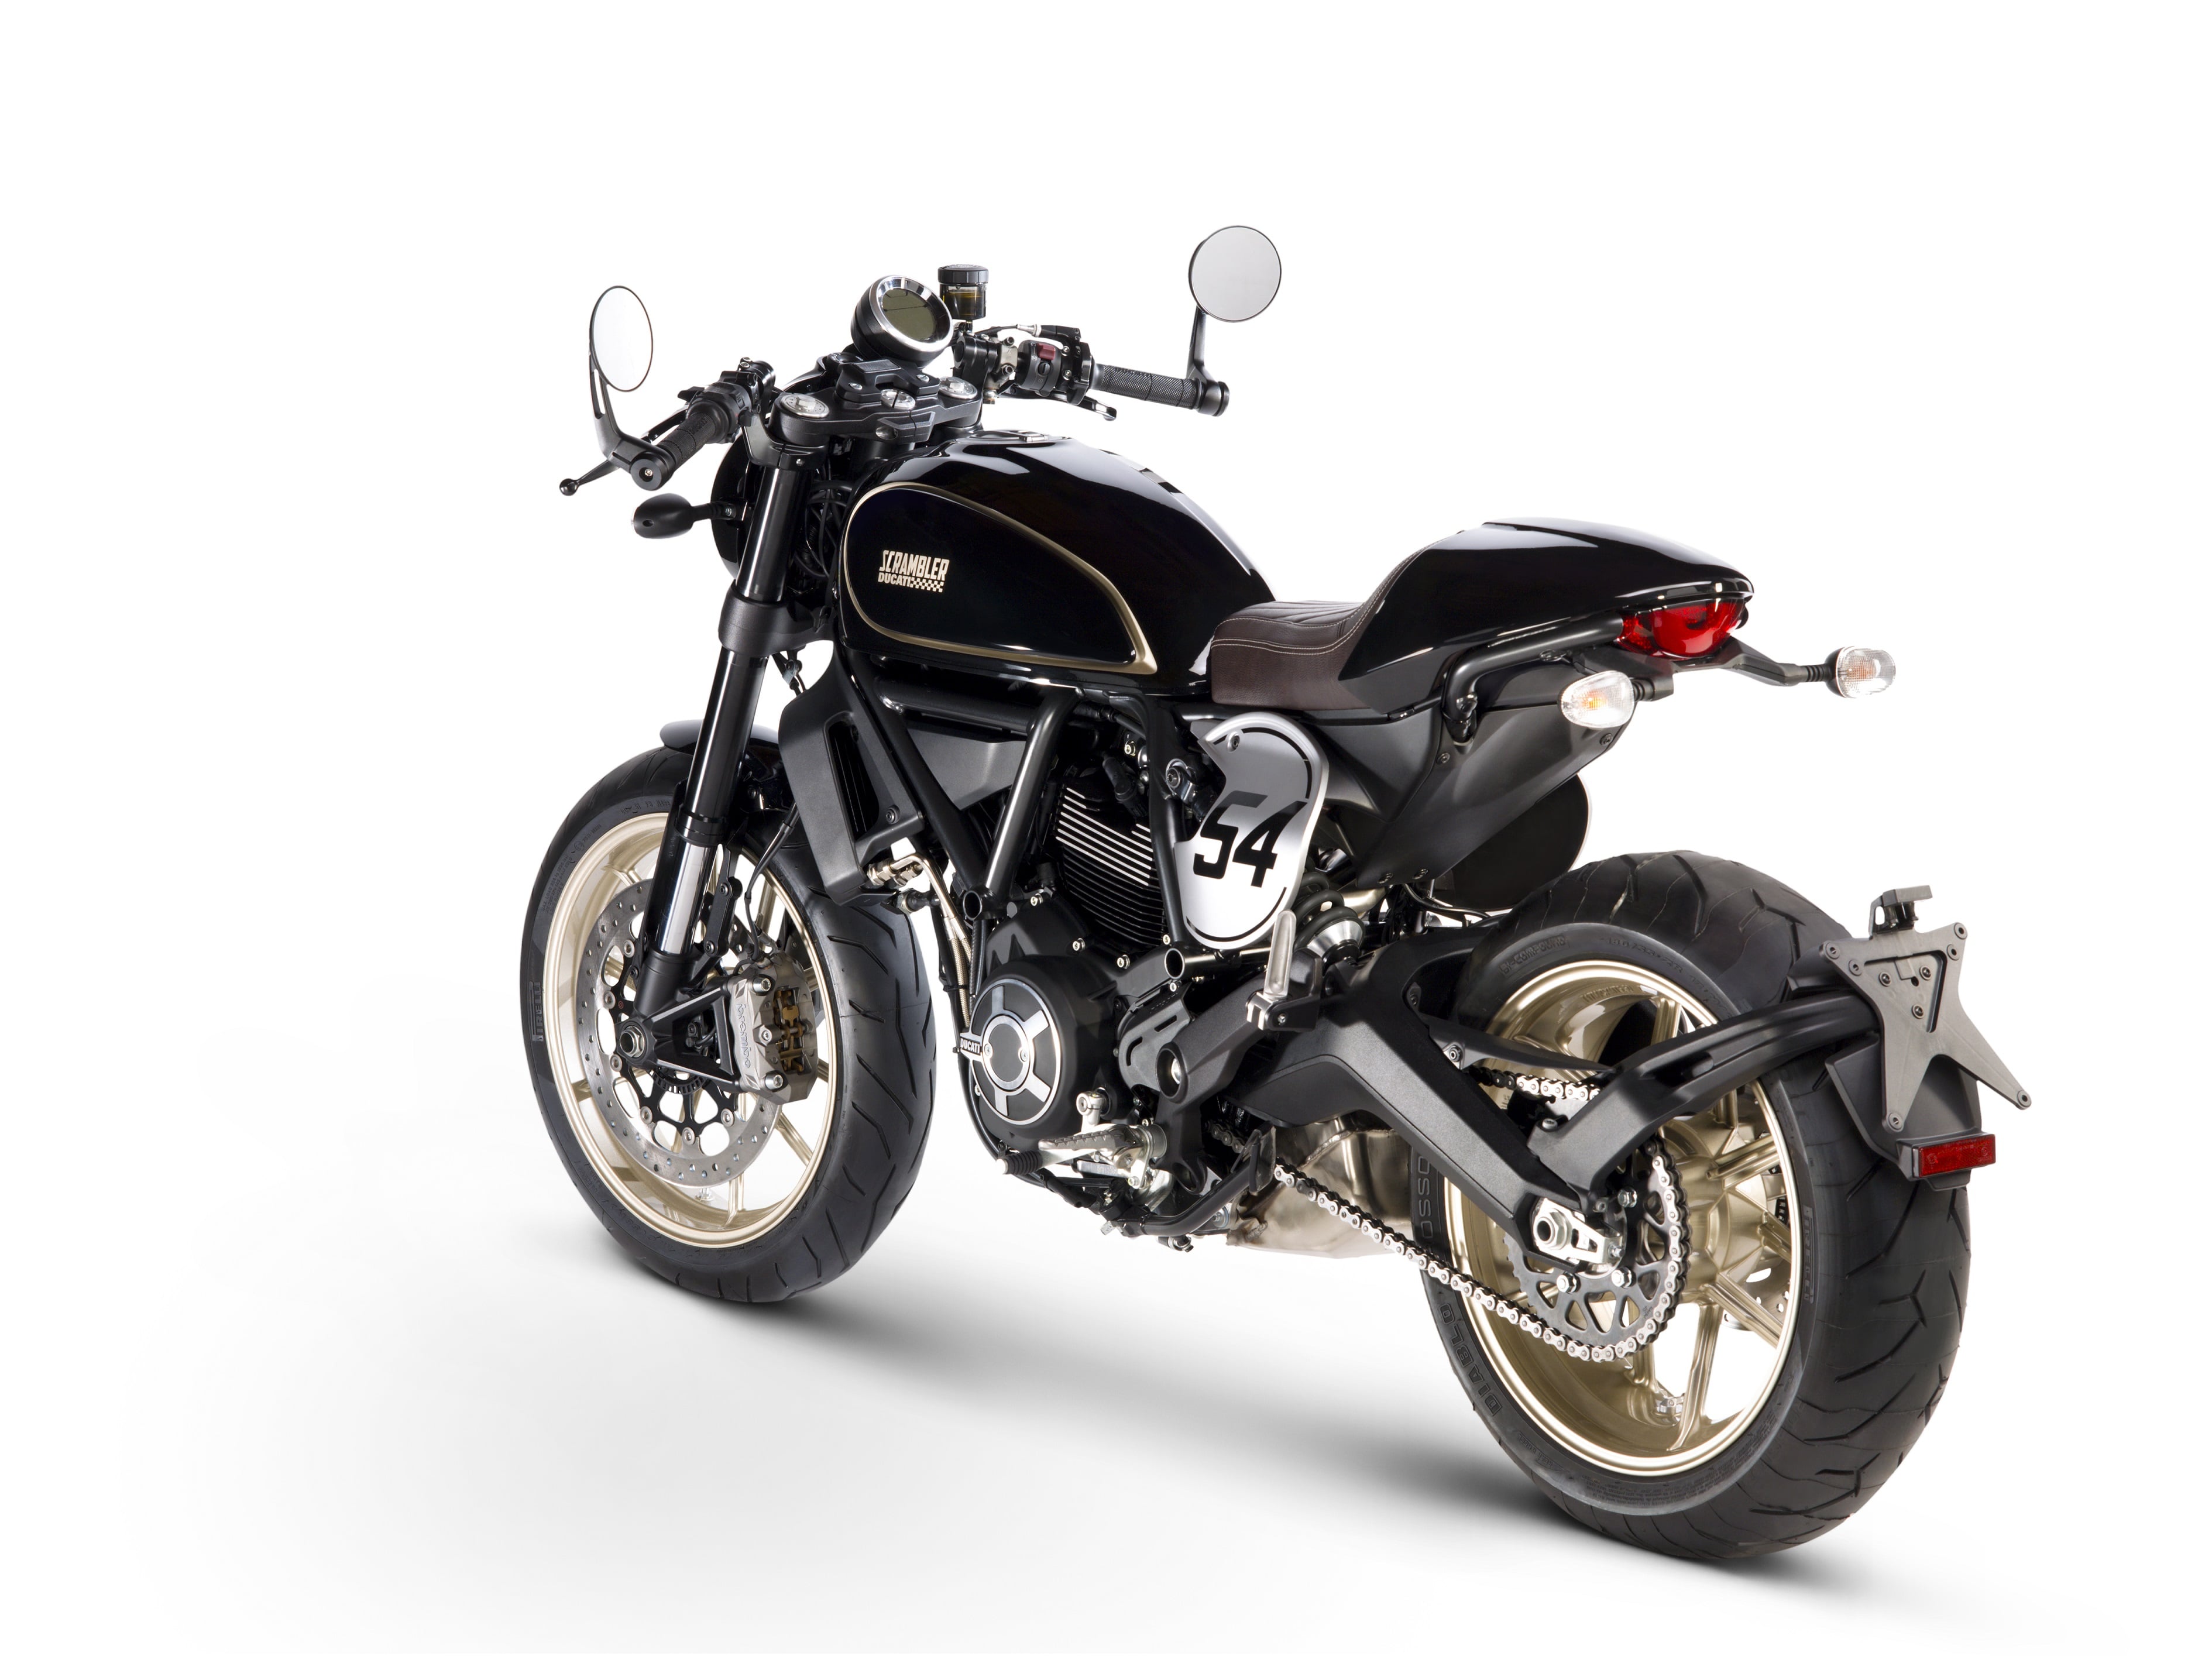 Ducati Scrambler Cafe Racer India Price in India, Specifications, Engine